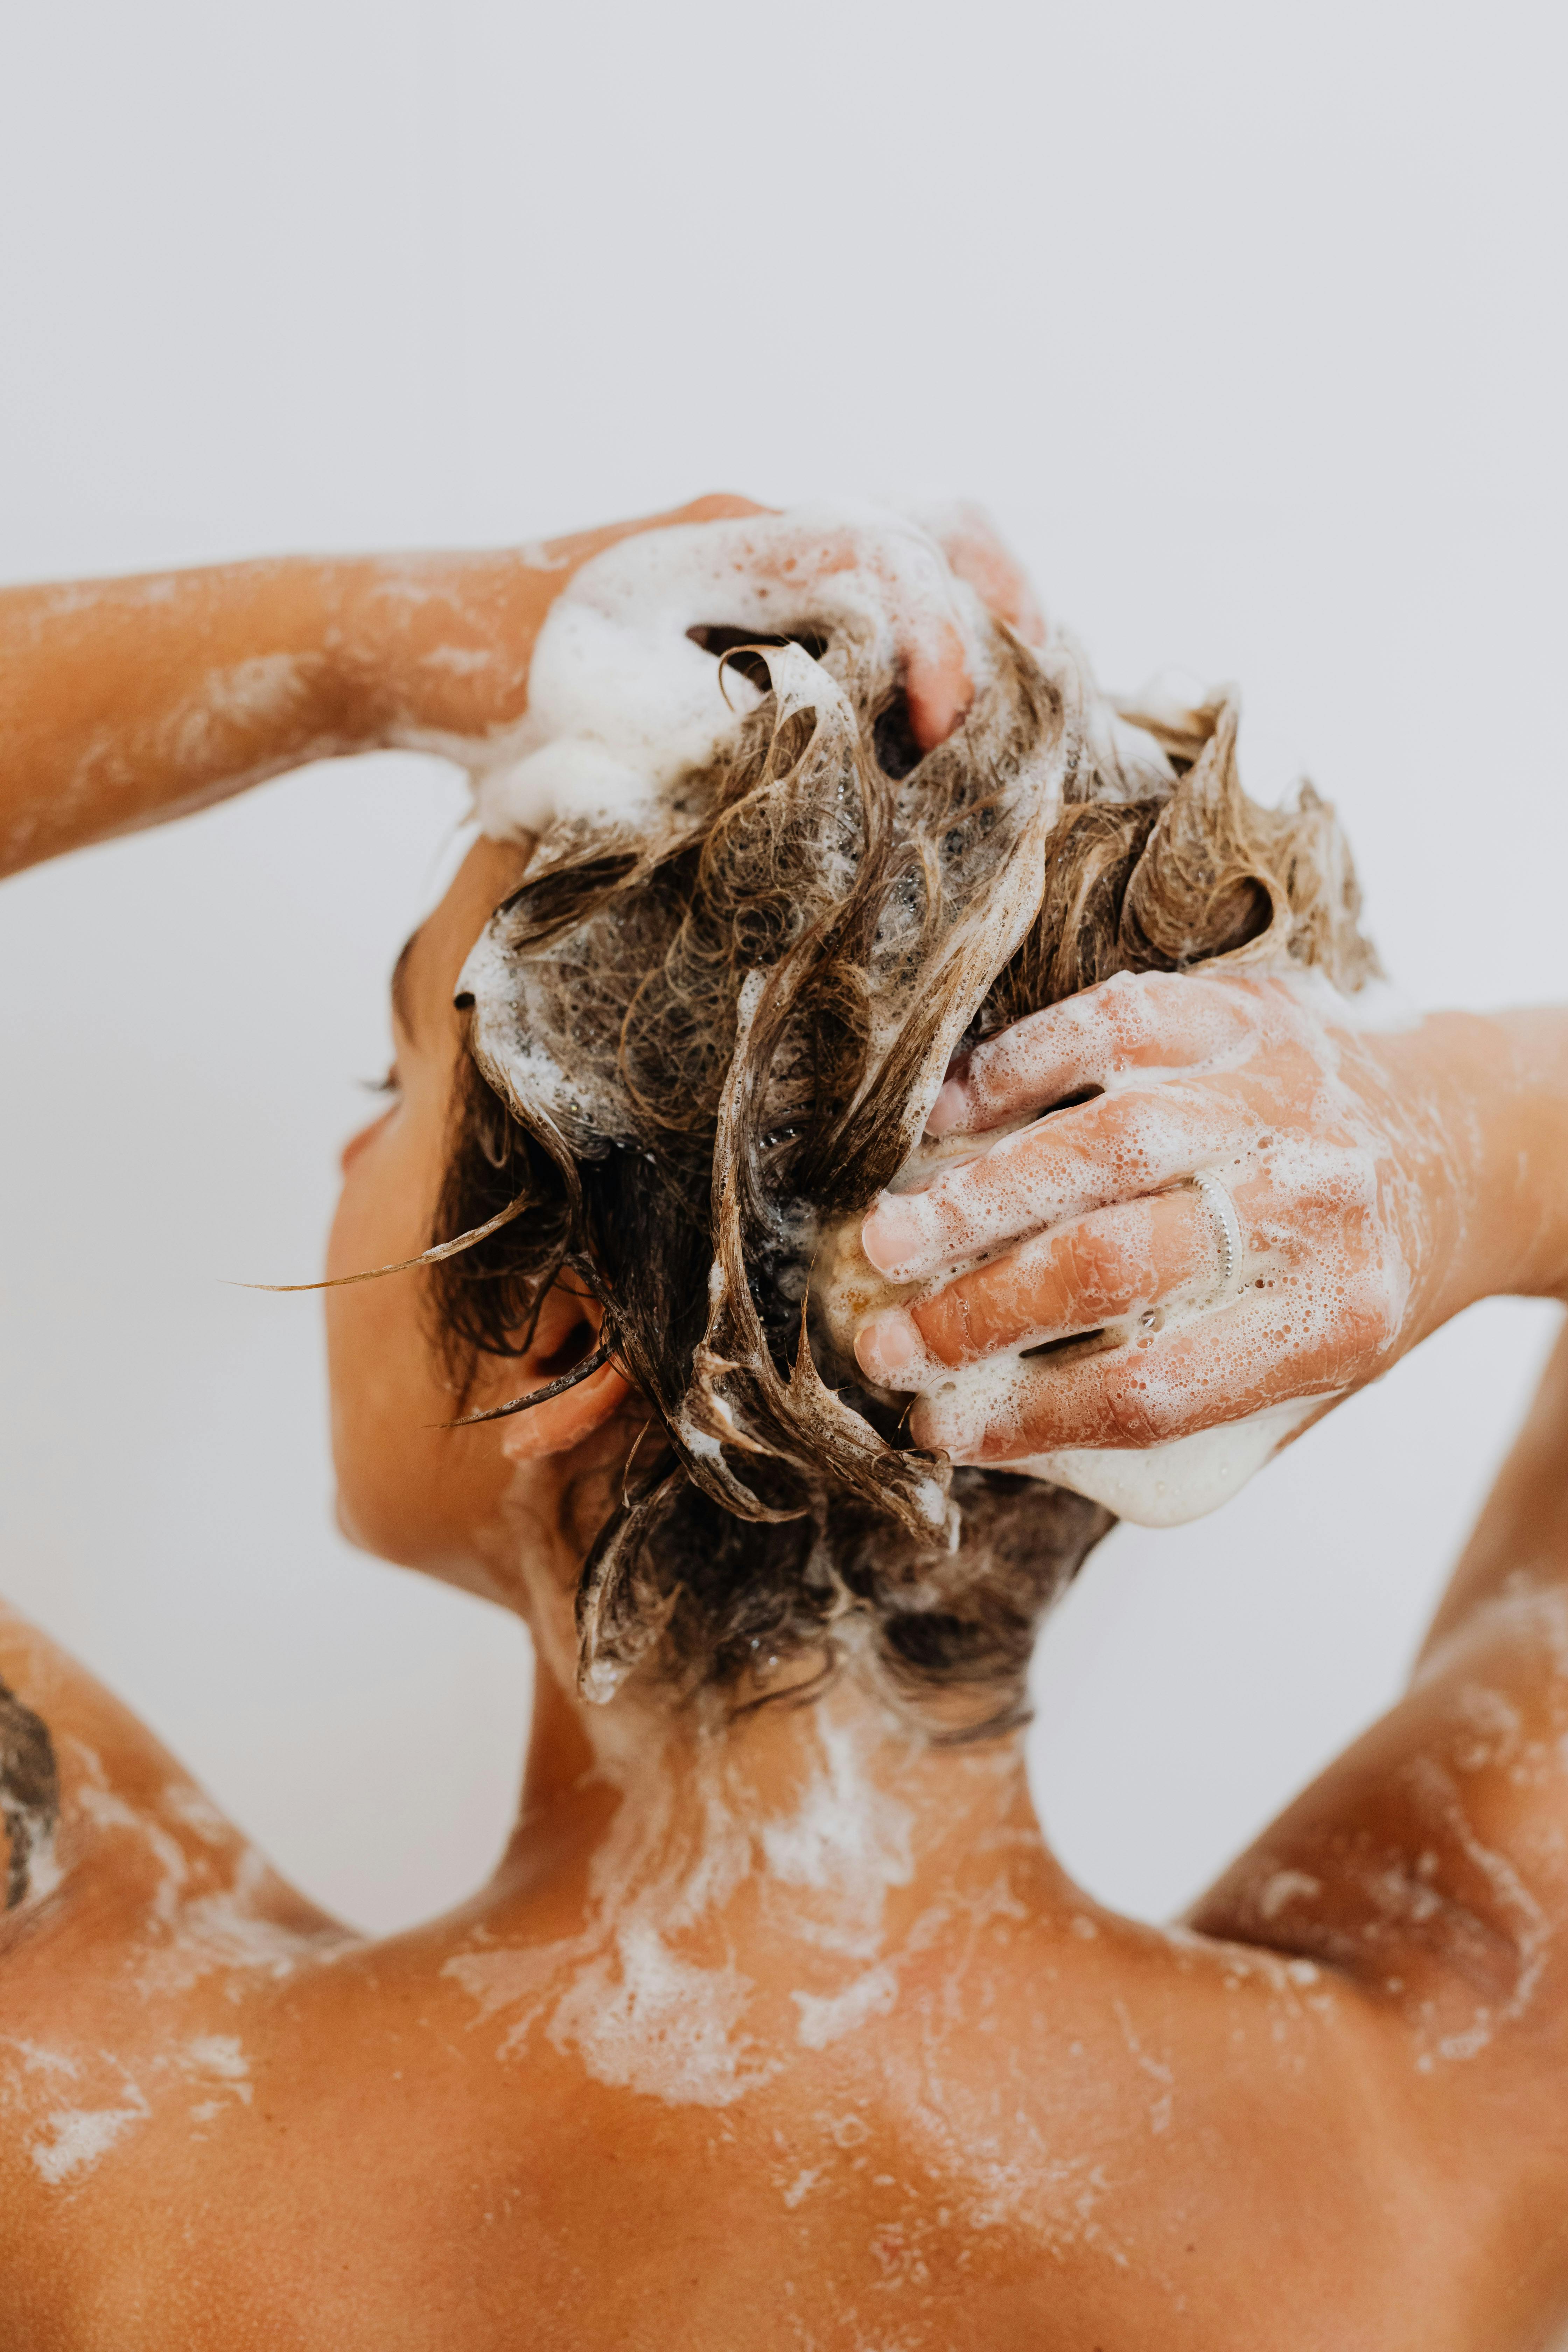 A woman washing her hair in the shower | Source: Pexels